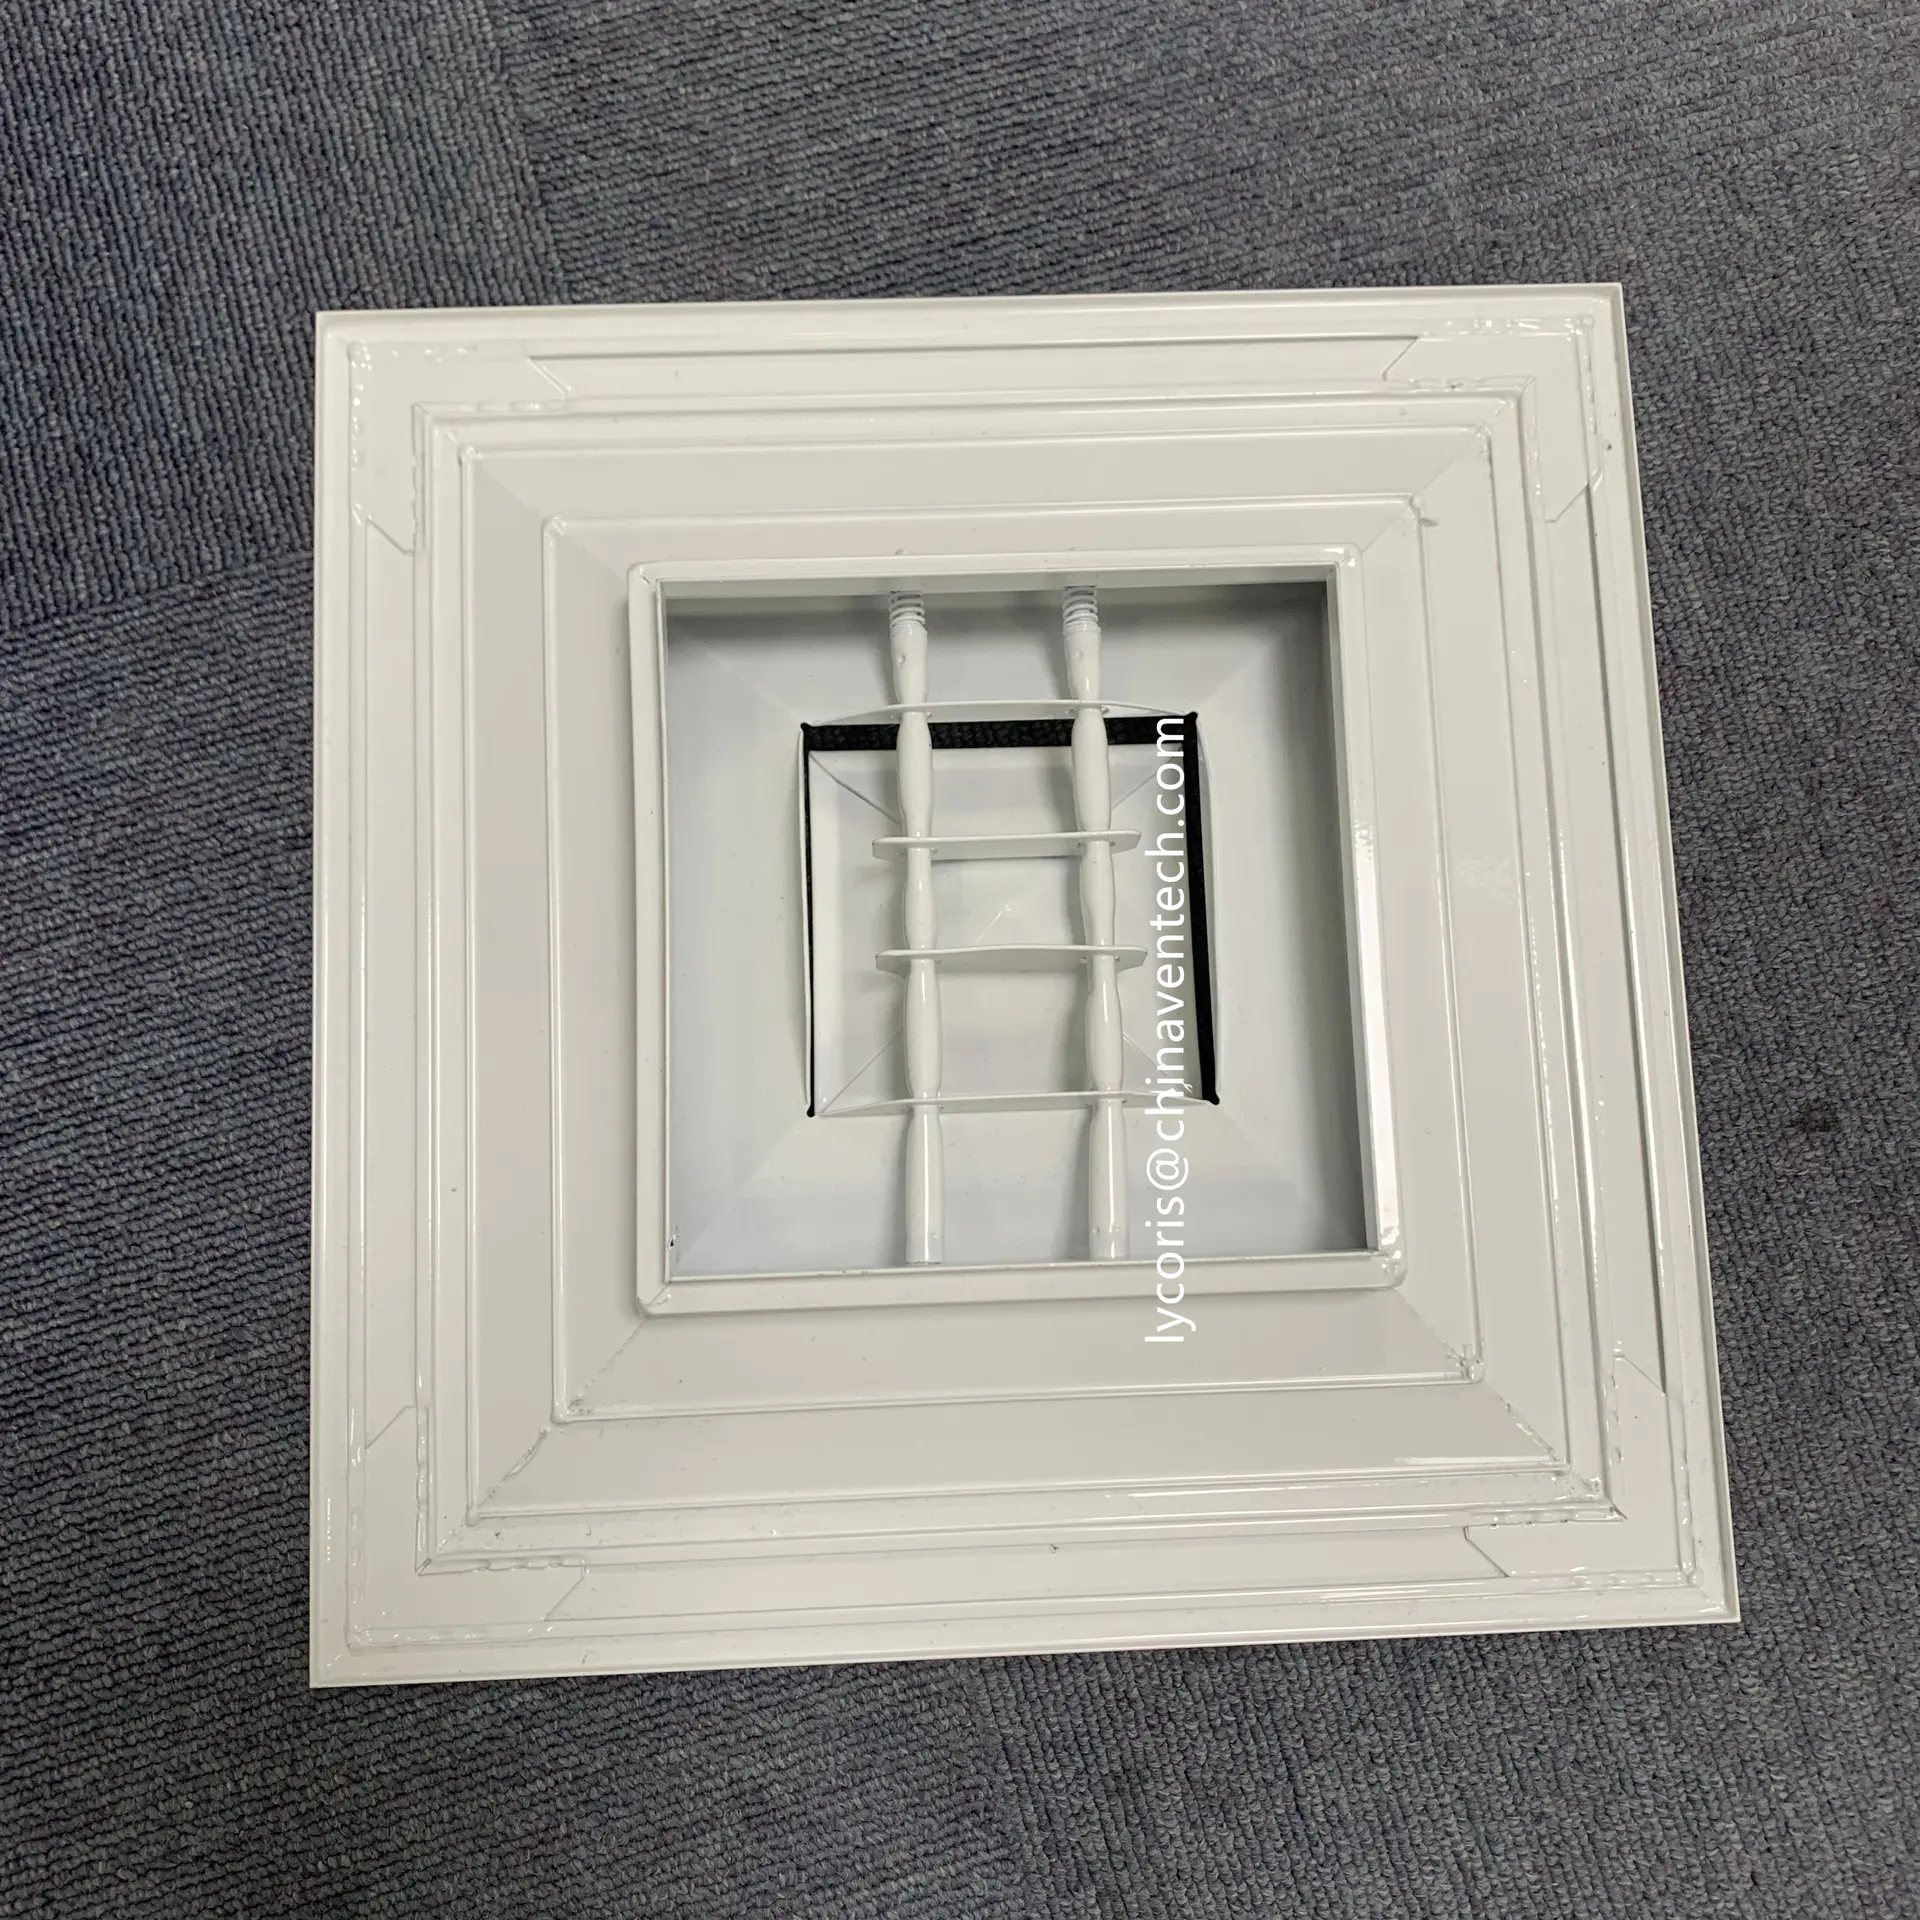 Common Used Square Ceiling Diffuser Air Diffuser for HVAC